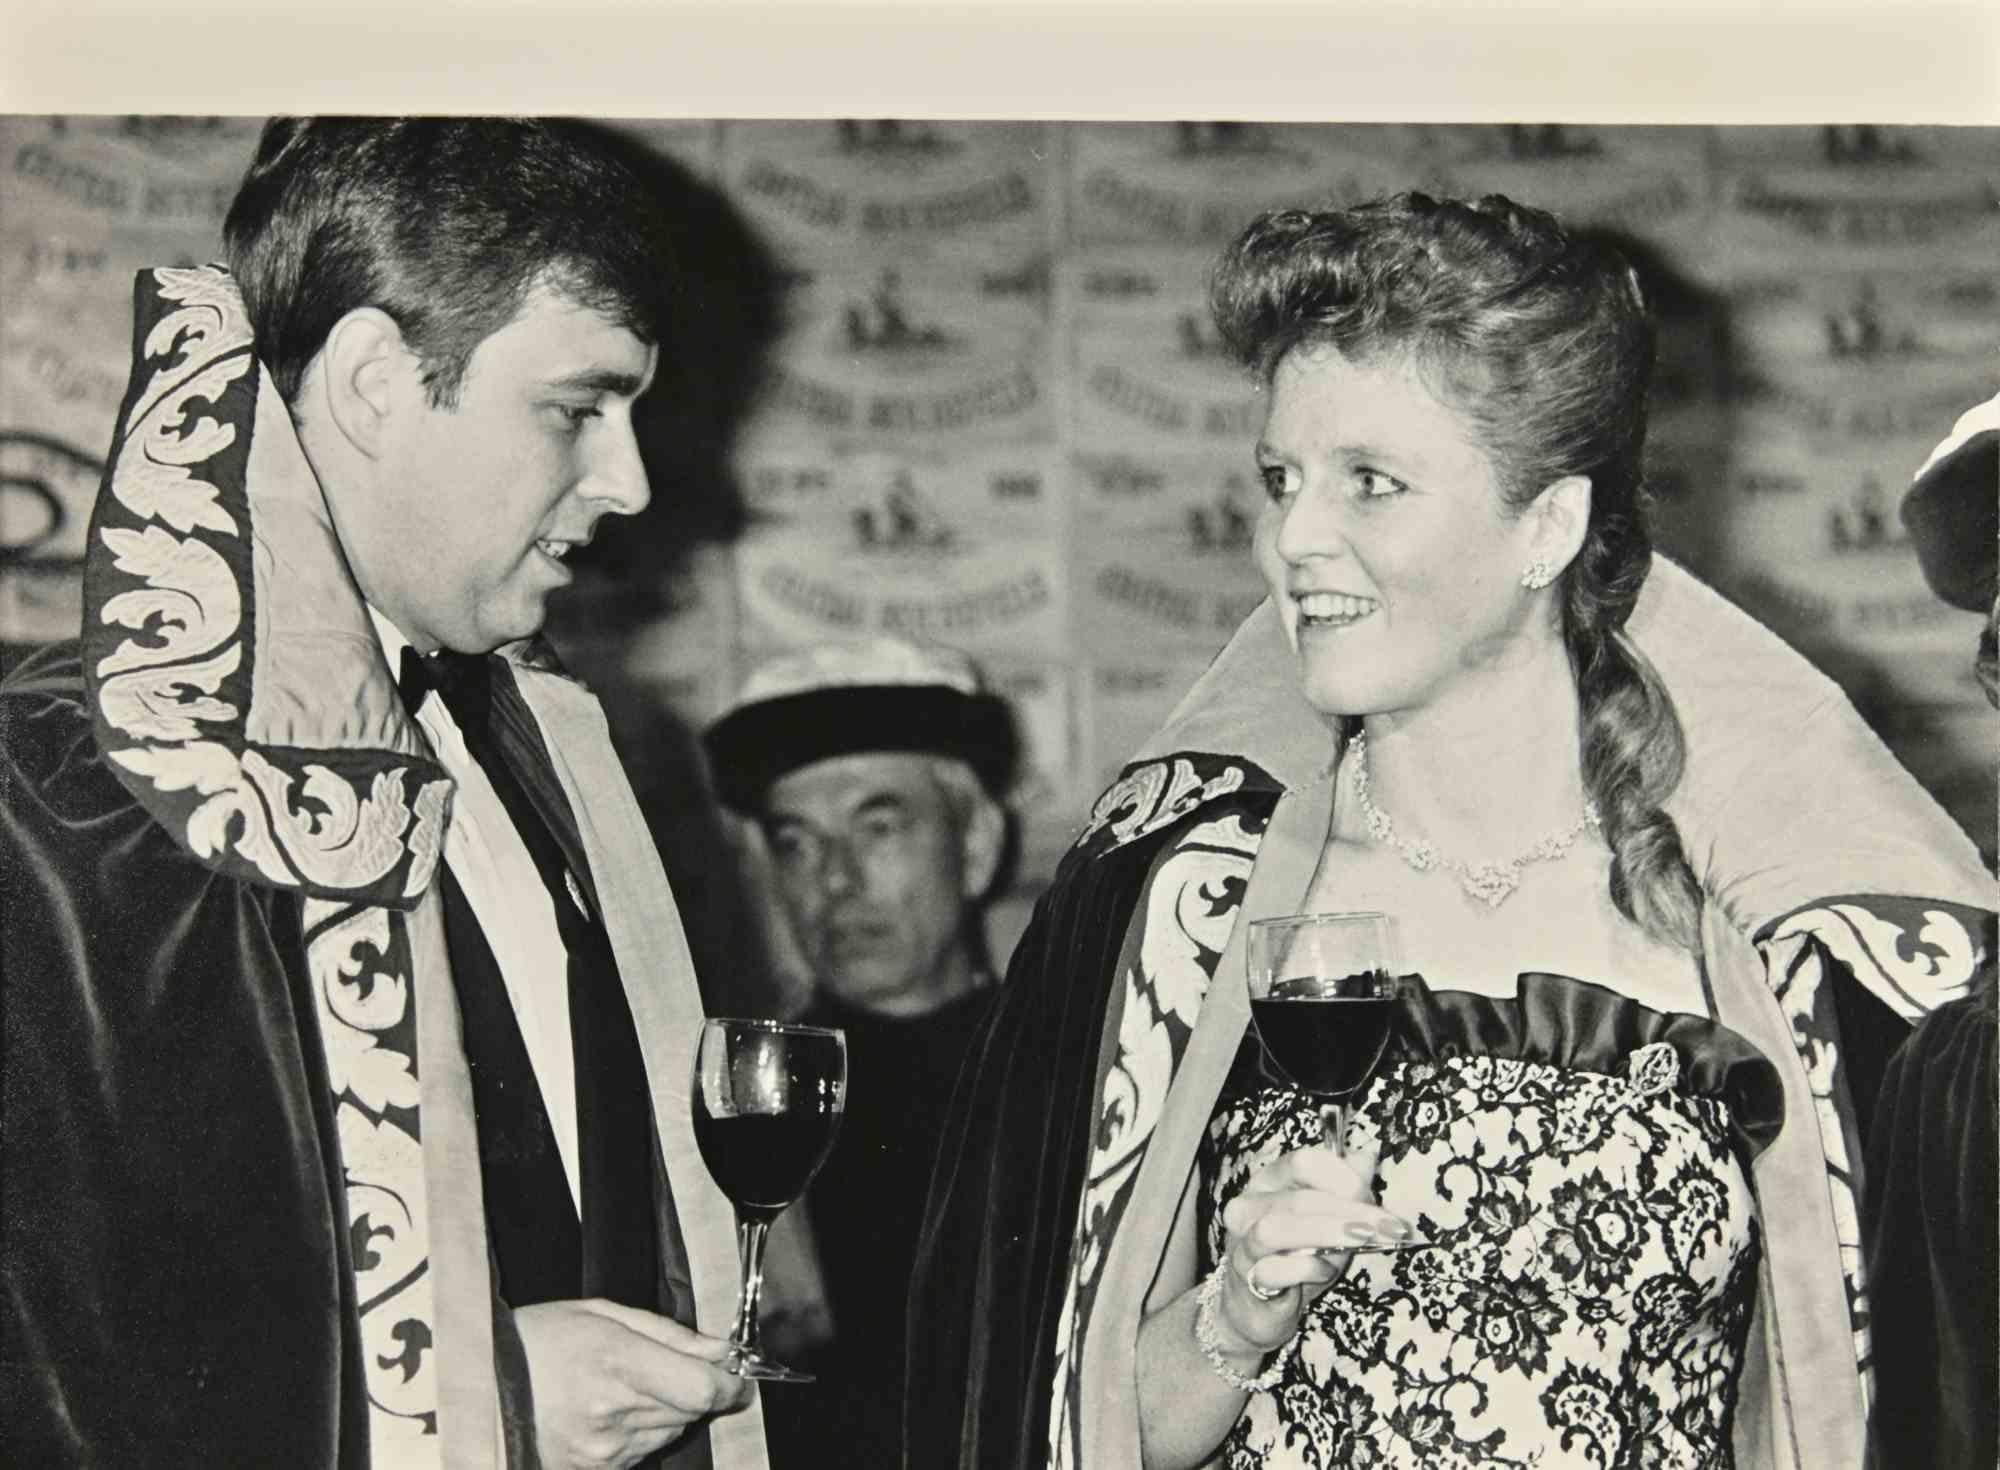 Unknown Figurative Photograph - Prince Andrew and Sarah Ferguson - Photograph - 1960s